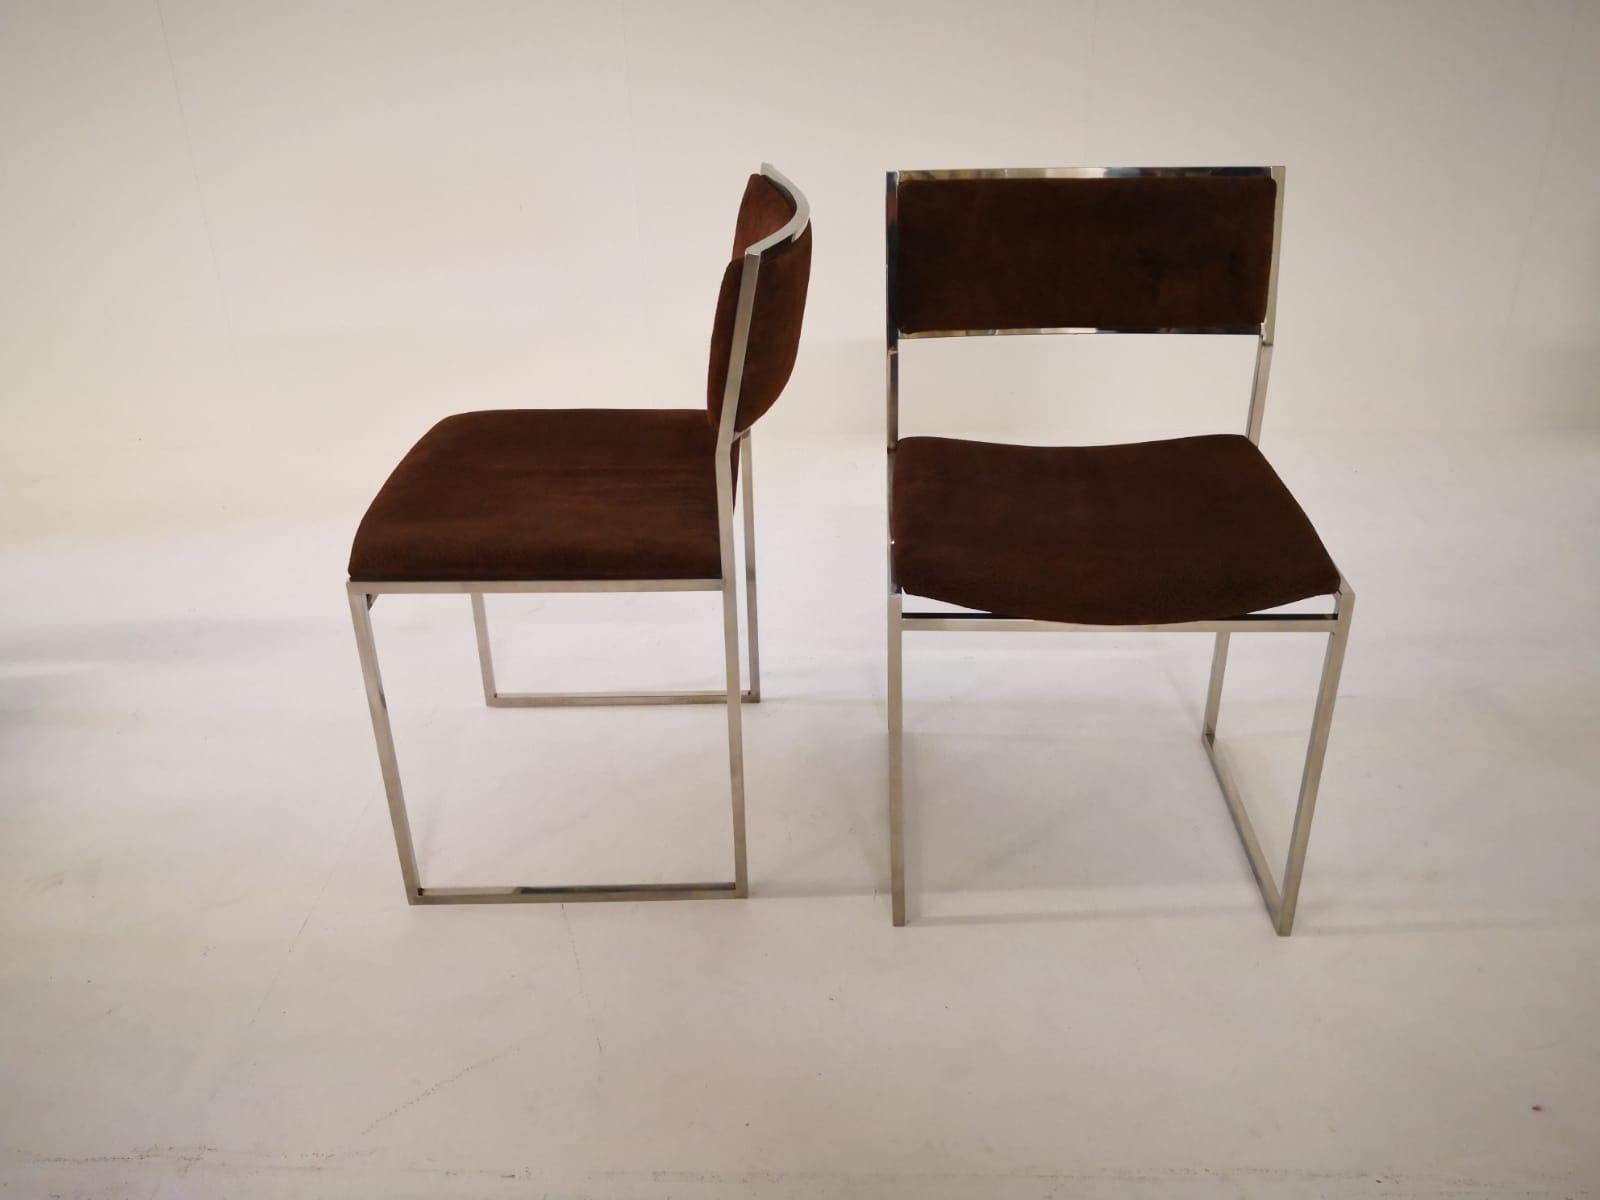 Mid-Century Modern Italian set of 4 chairs by Willy Rizzo, 1970s.